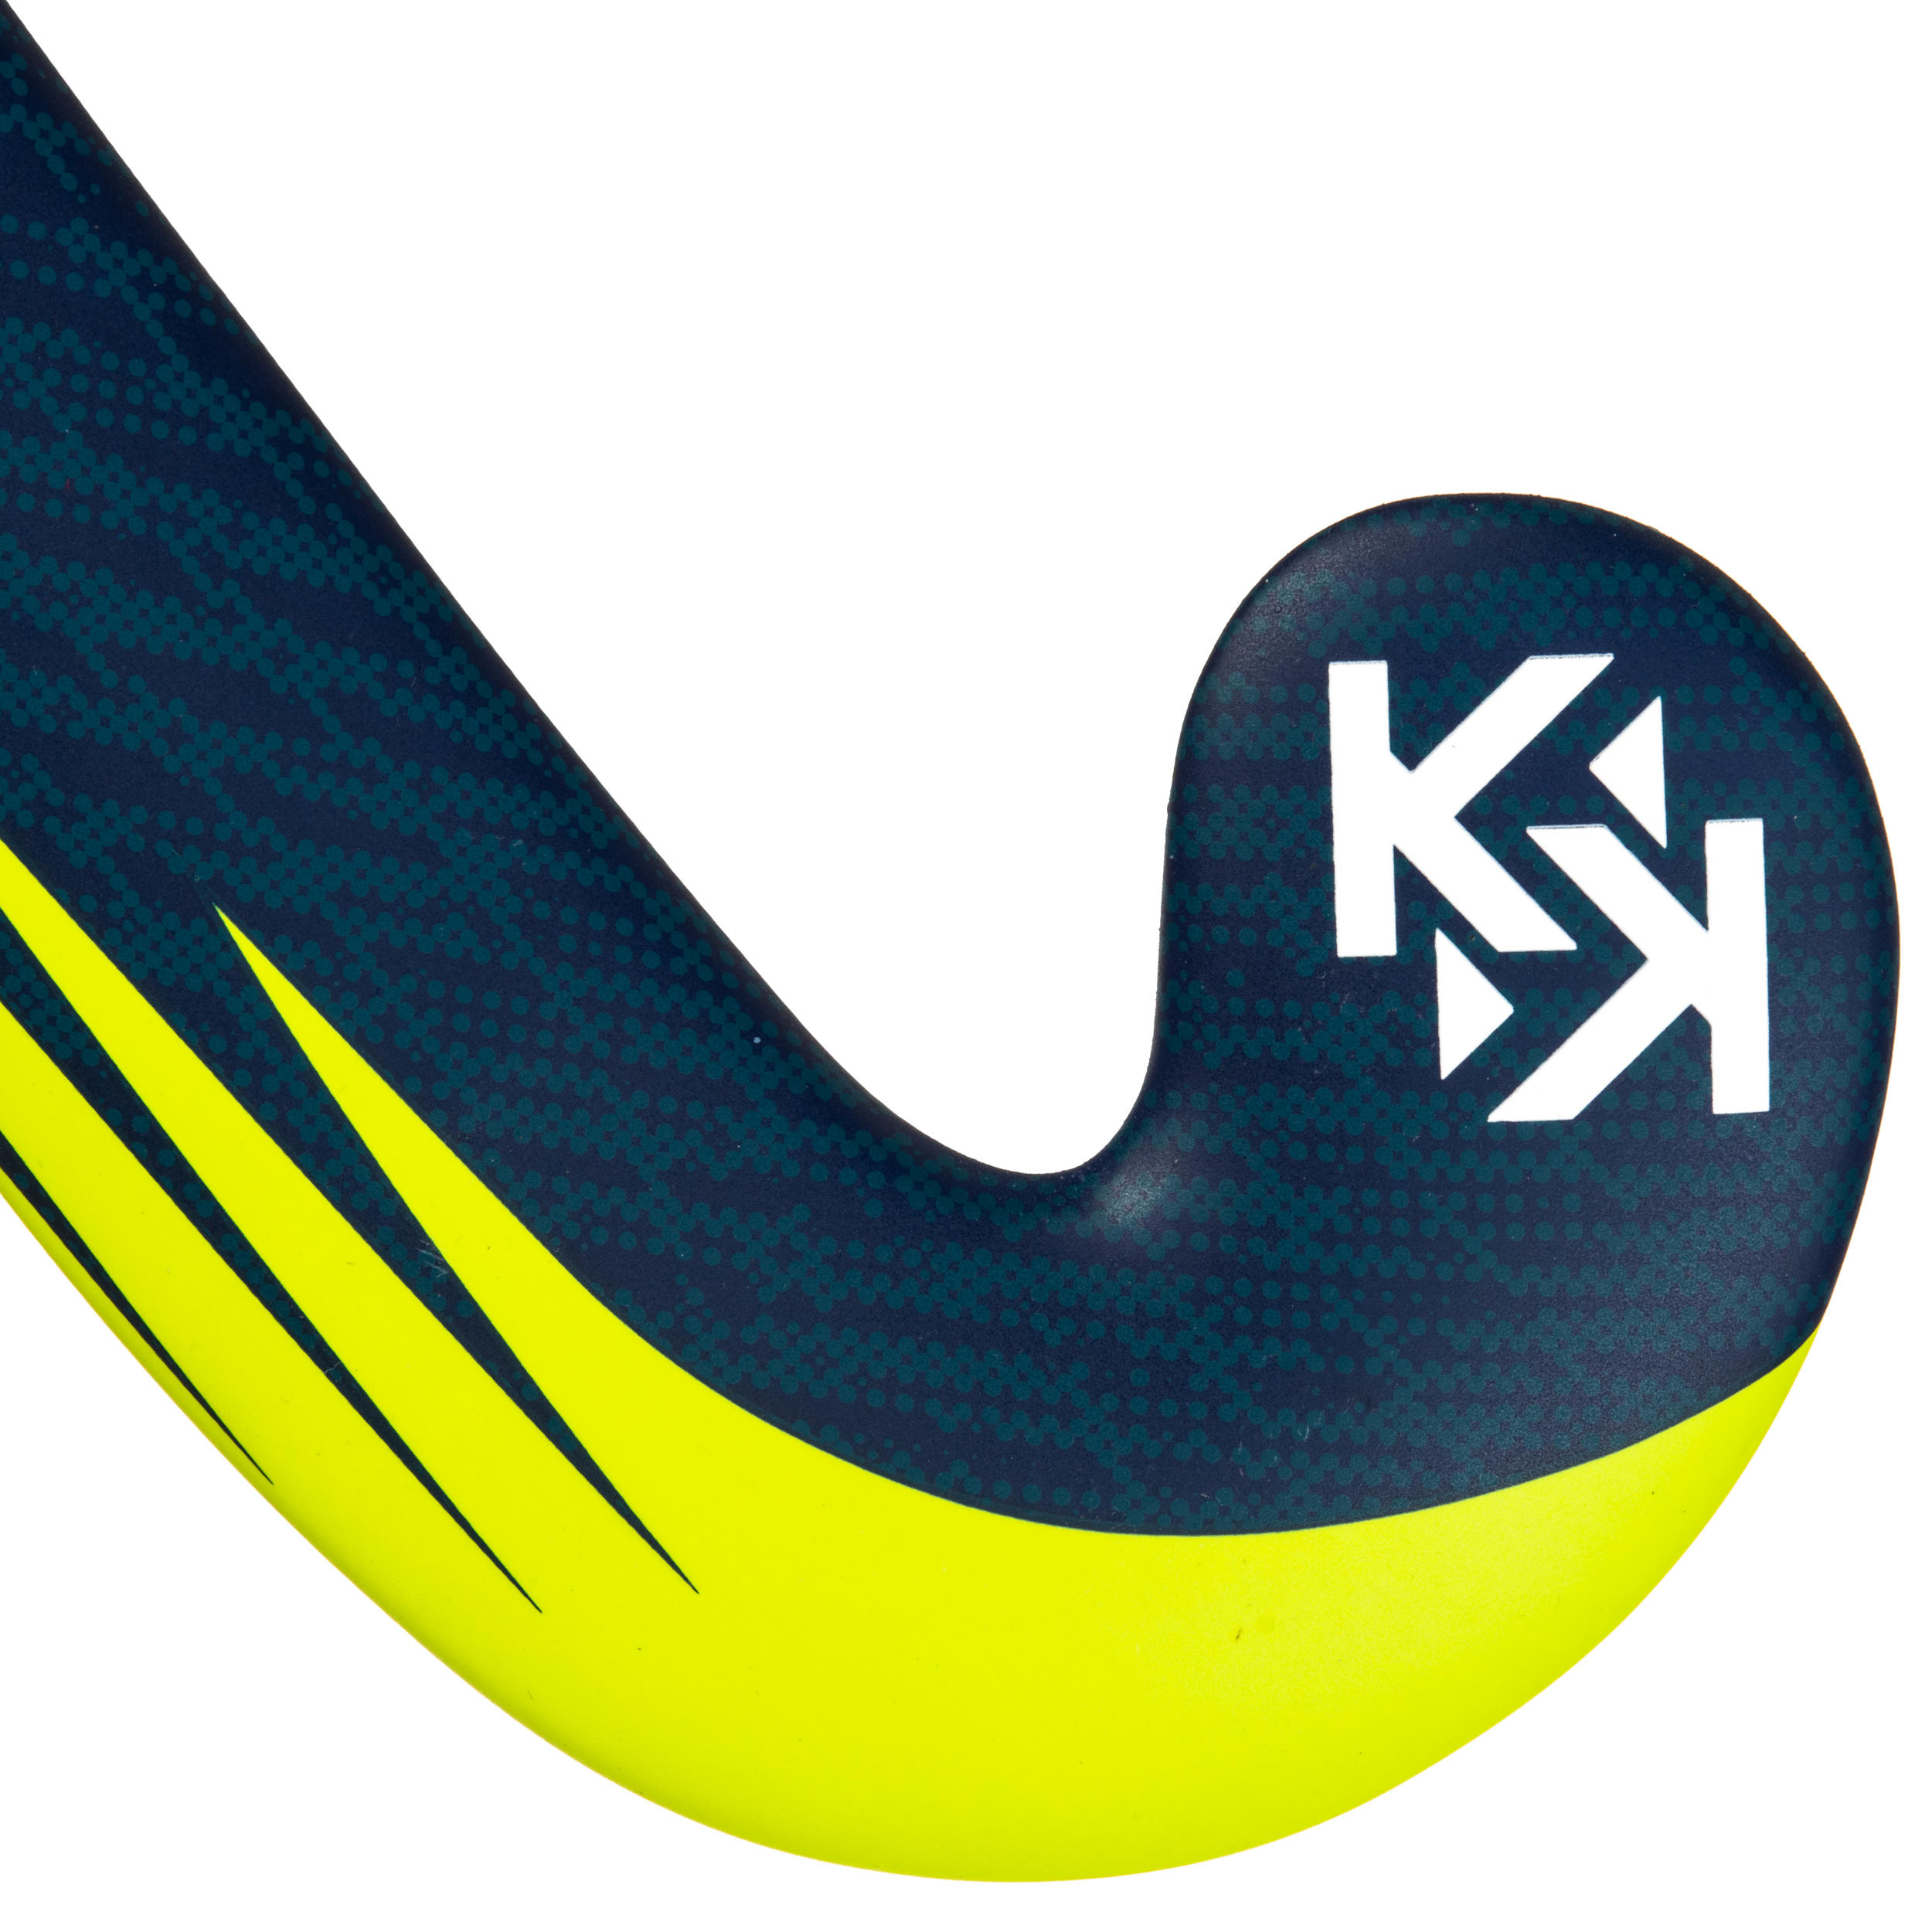 Adult Intermediate 20% Carbon Low Bow Indoor Hockey Stick FH520 - Blue/Yellow 10/10